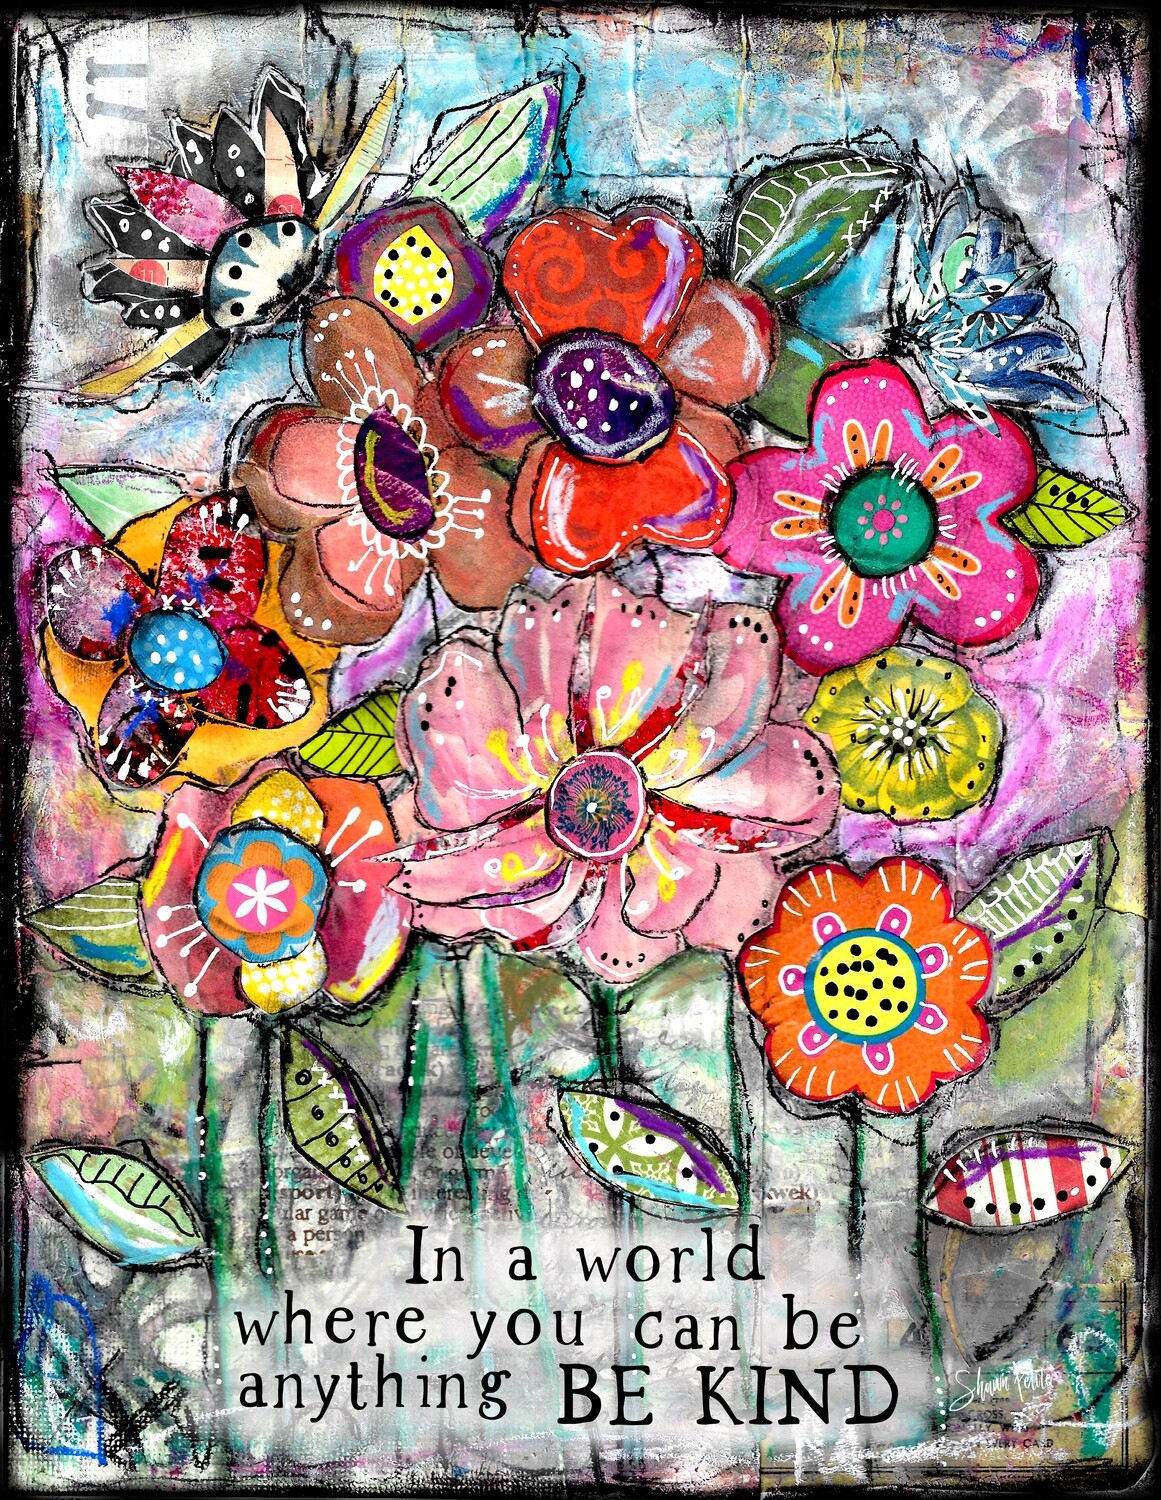 "In a world where you can be anything be kind" Print on Wood 5x7 Overstock